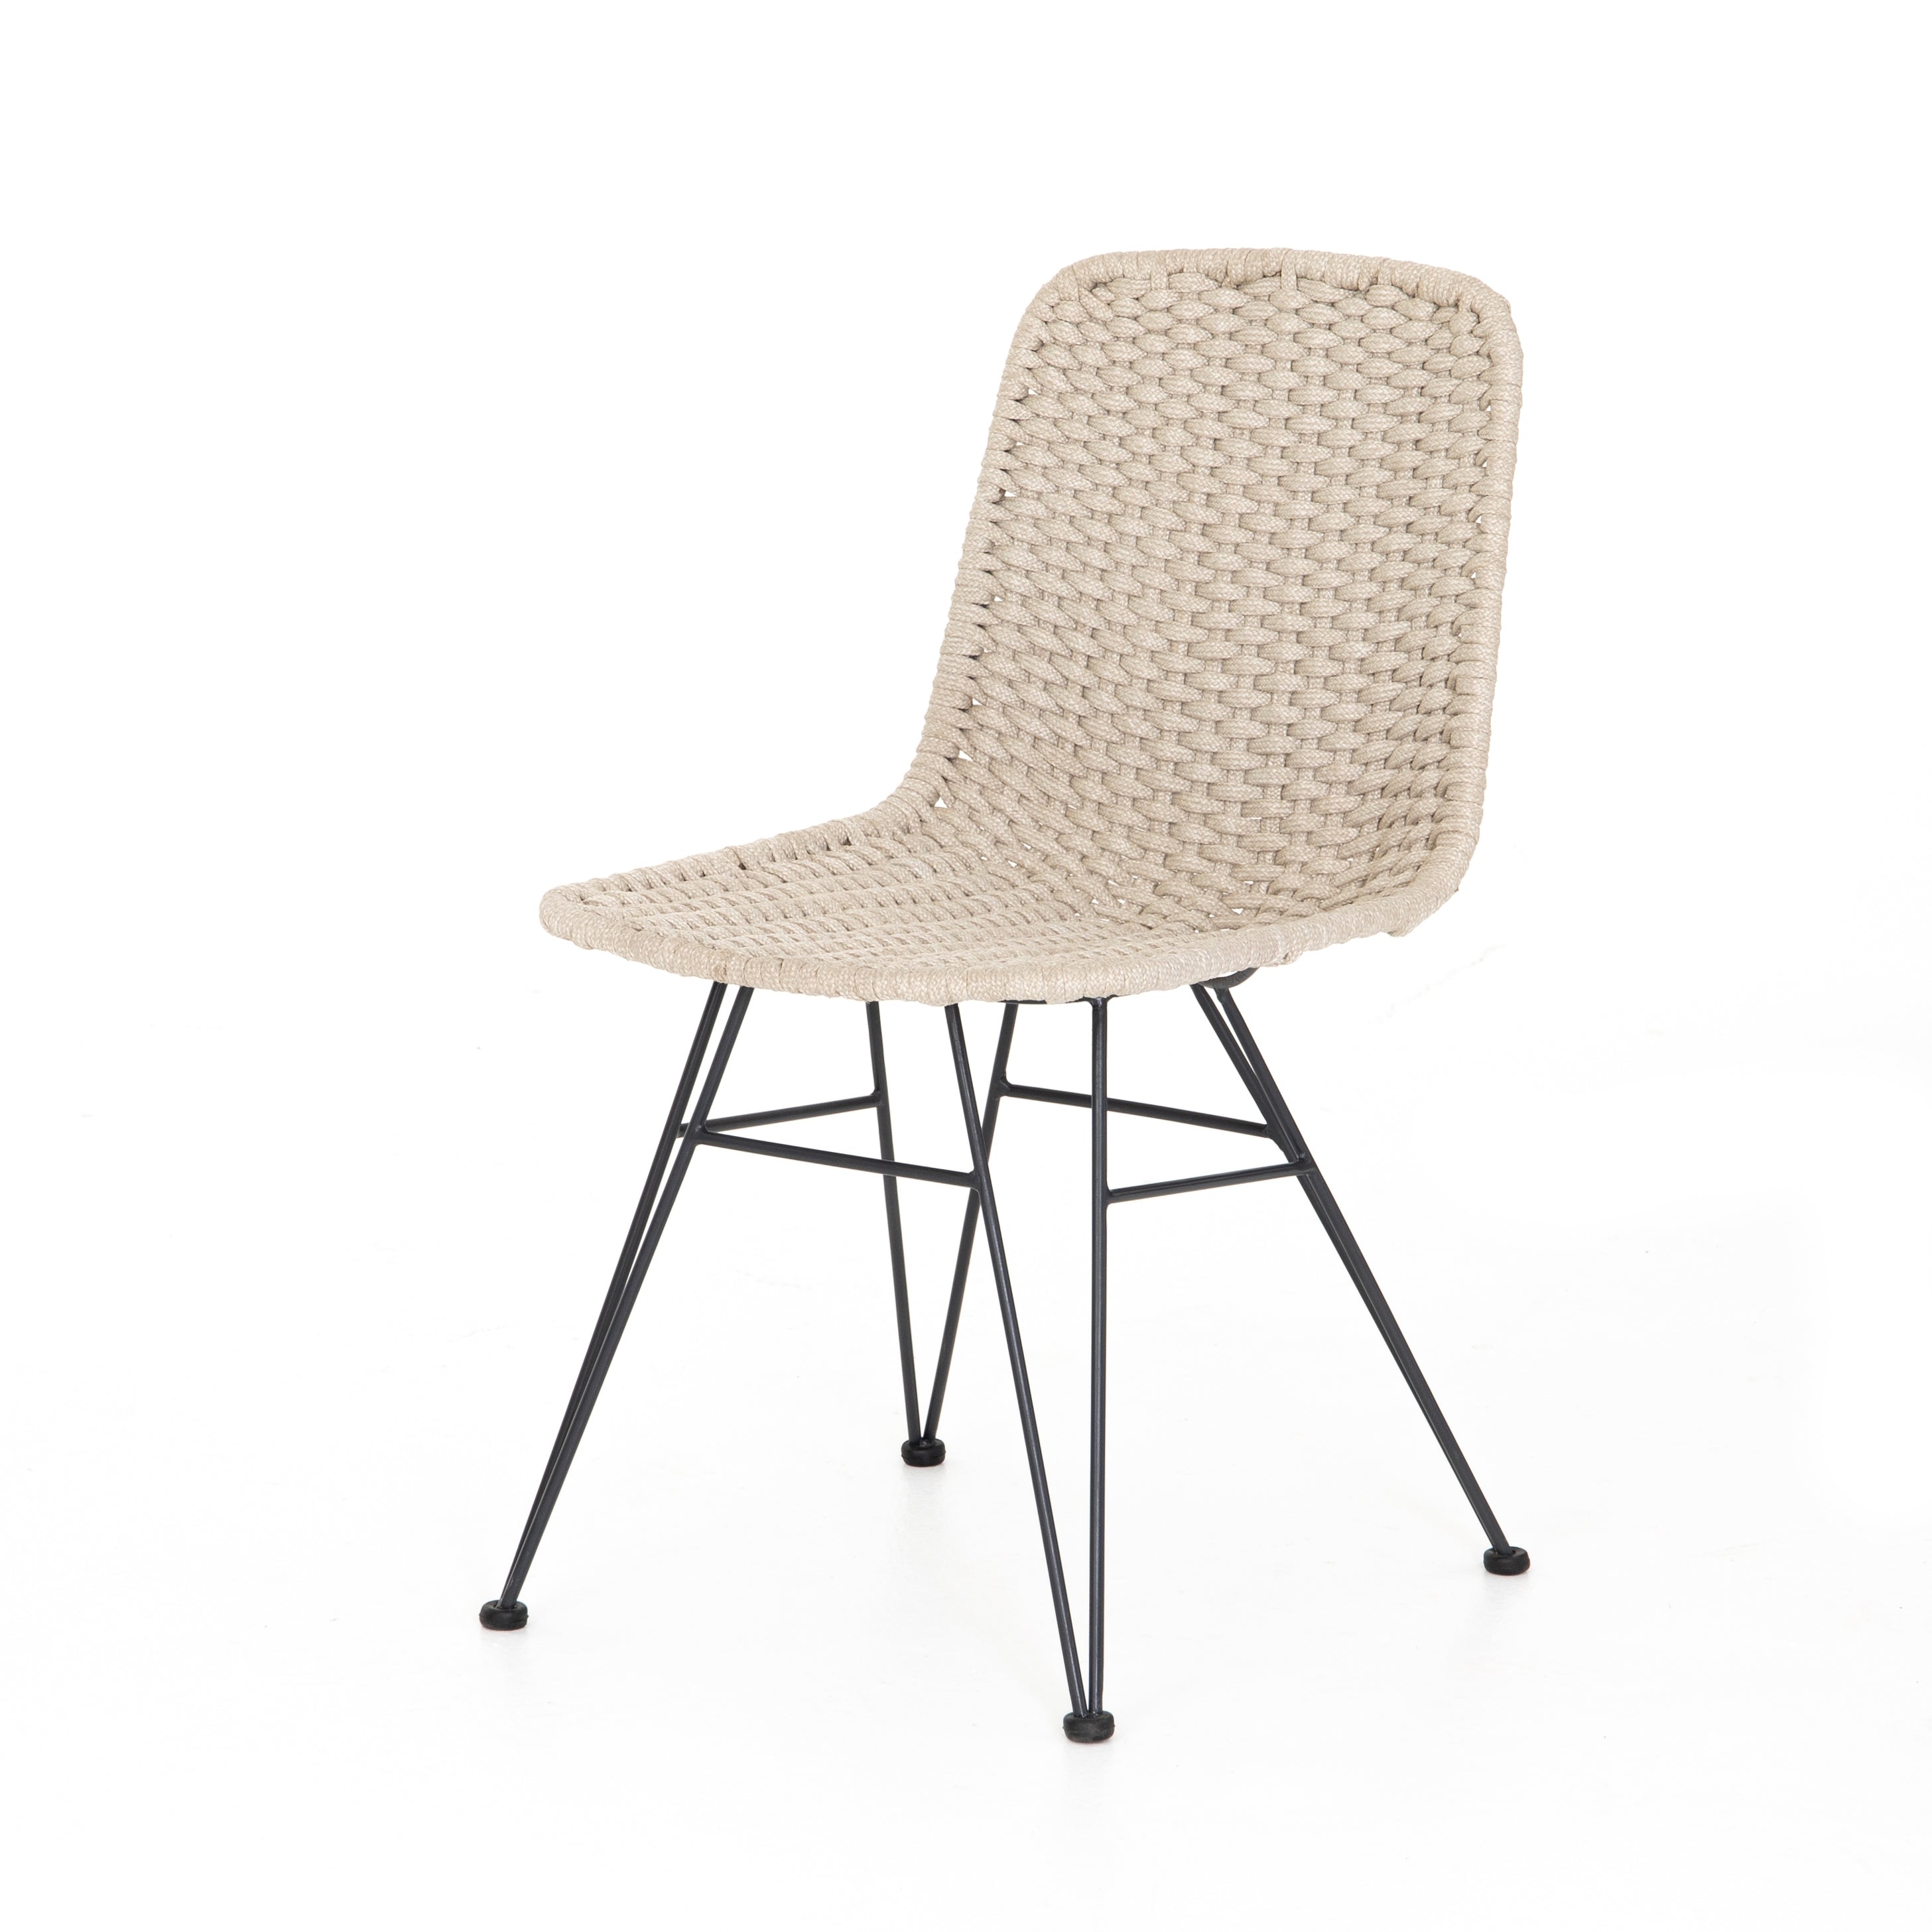 EMMA OUTDOOR DINING CHAIR